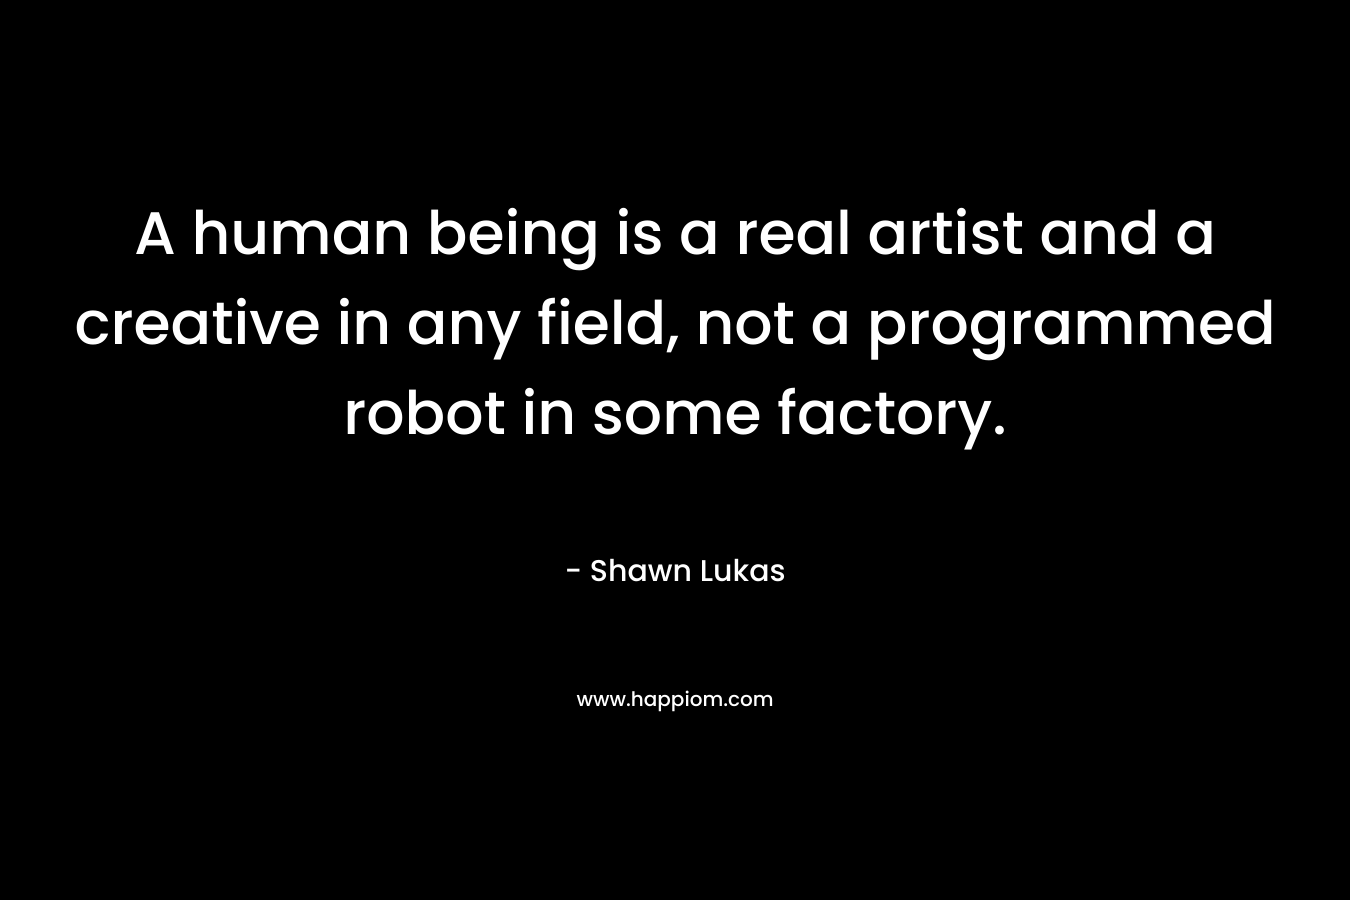 A human being is a real artist and a creative in any field, not a programmed robot in some factory.